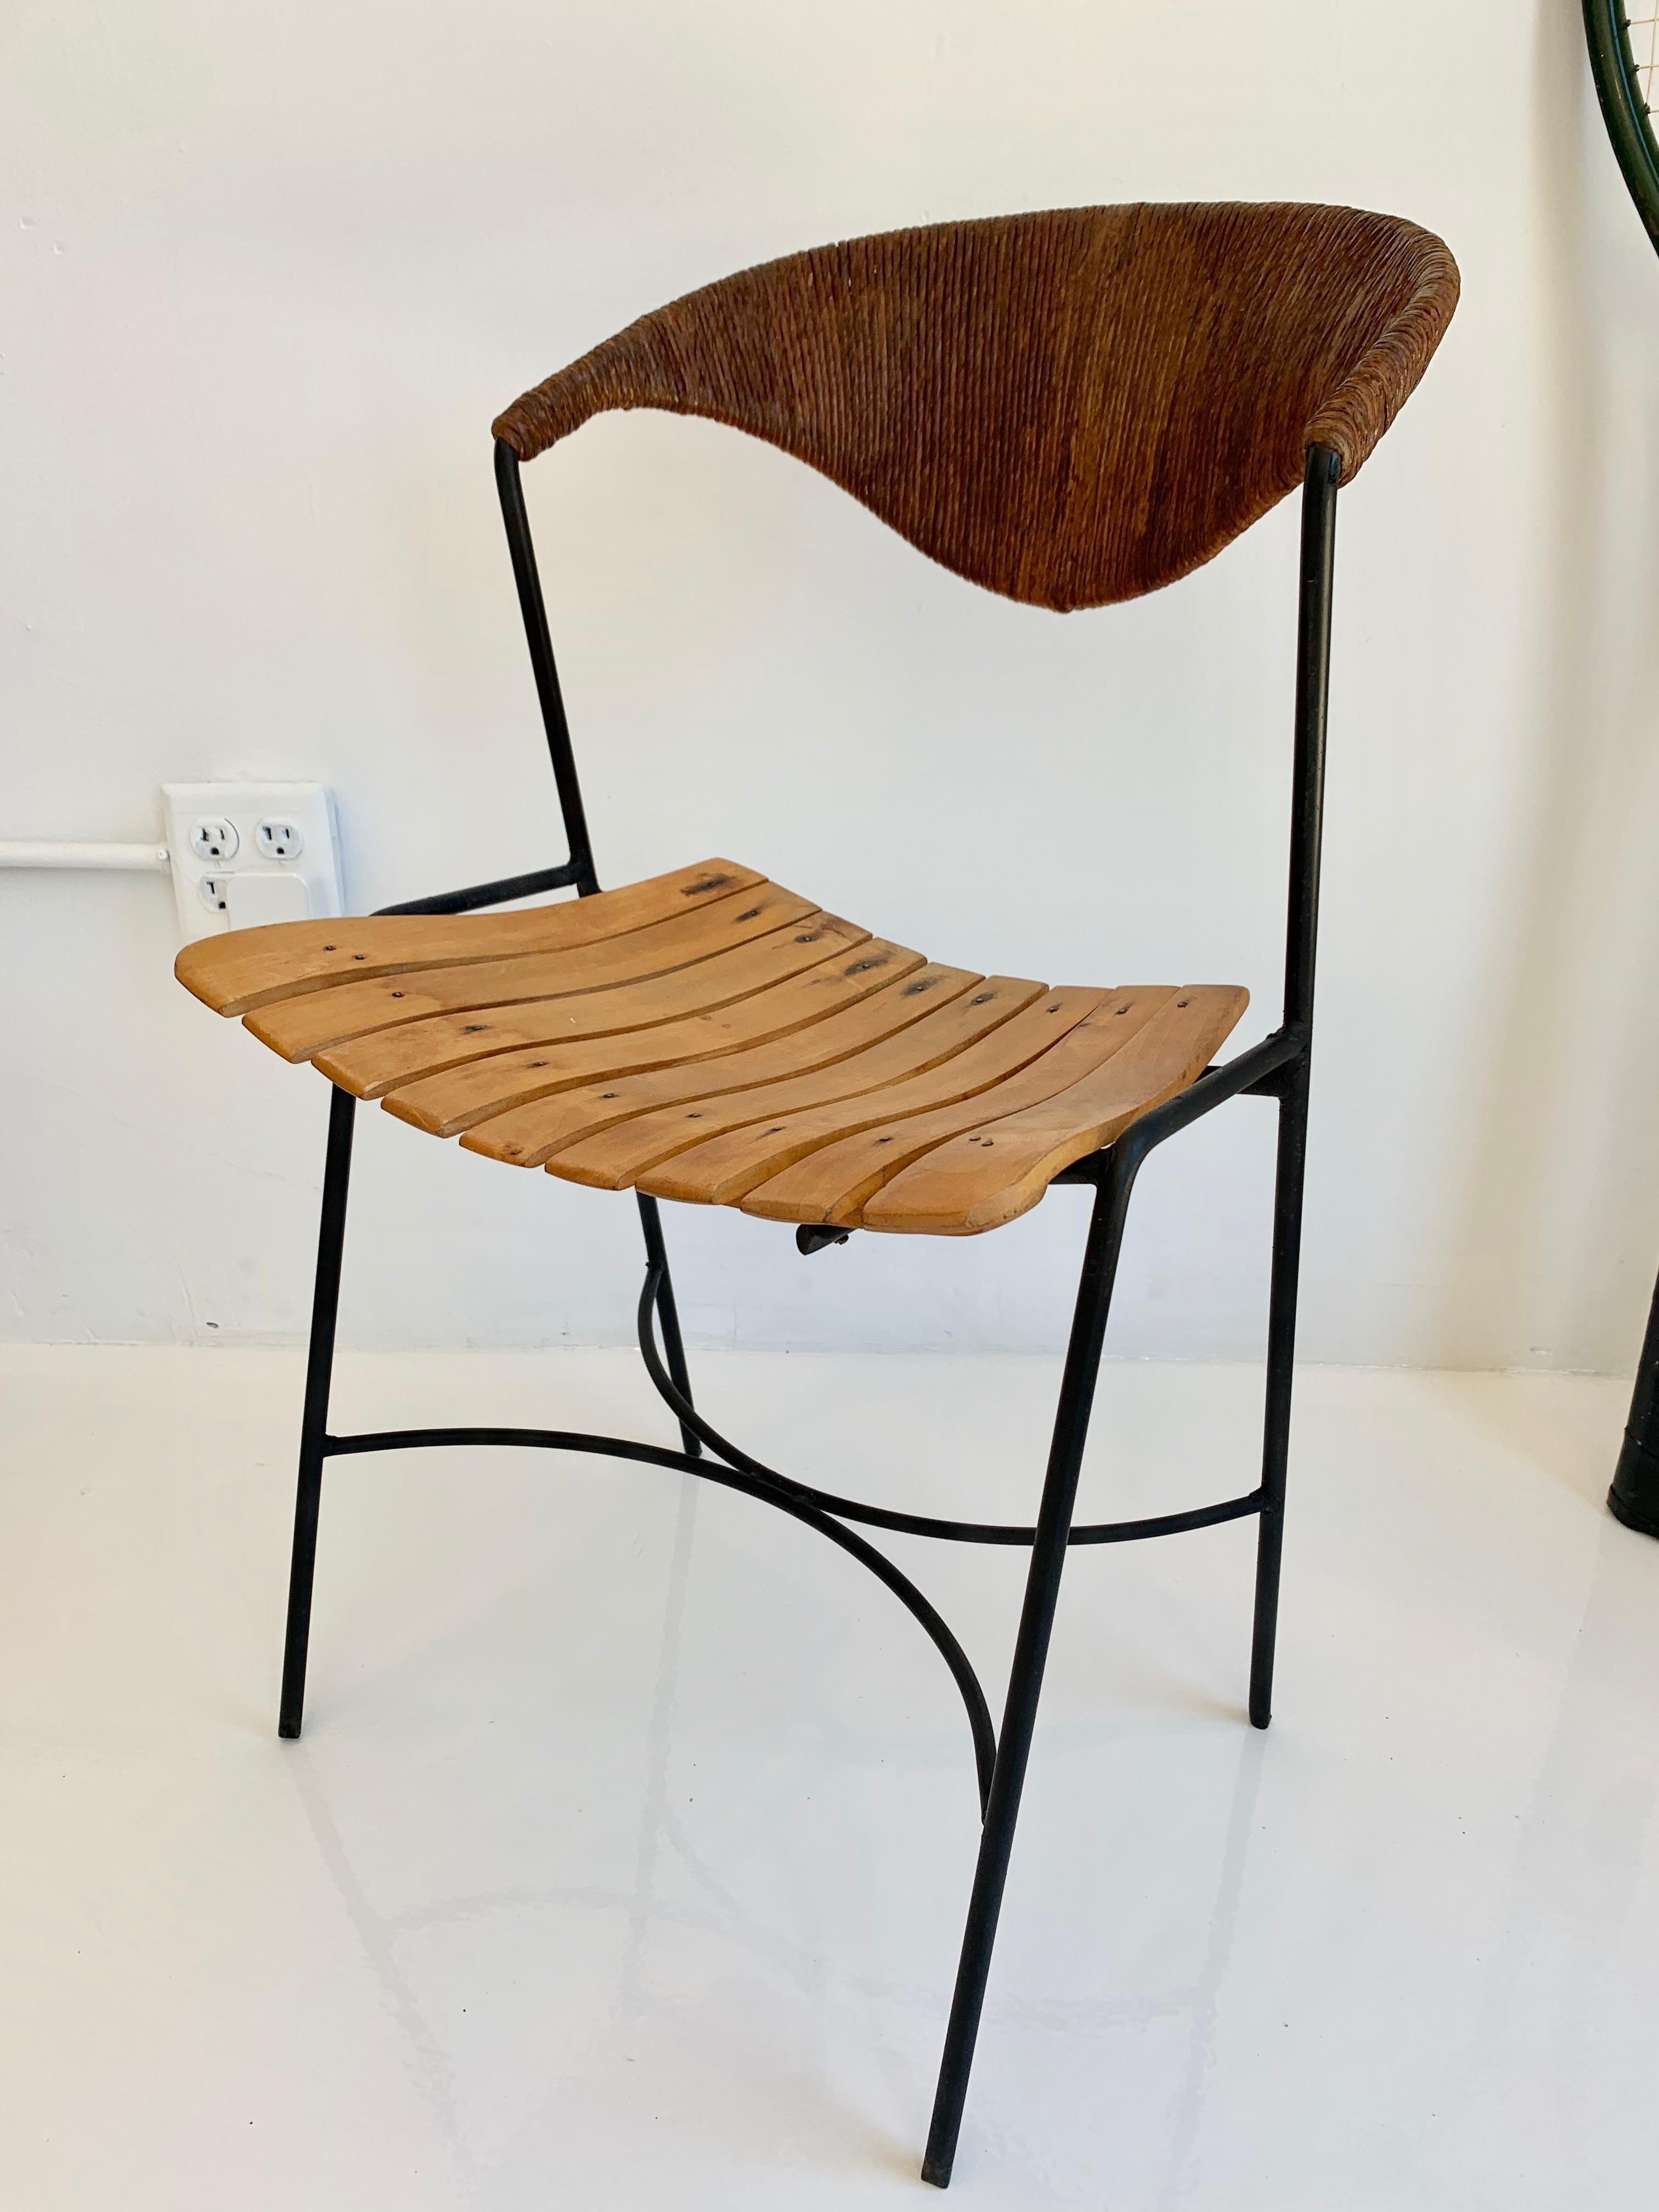 Sculptural Arthur Umanoff chairs with signature rush back, slatted wood seat, and iron legs. Floating backrest. Look great from all angles. Great vintage condition. Two available. Priced individually. 
 